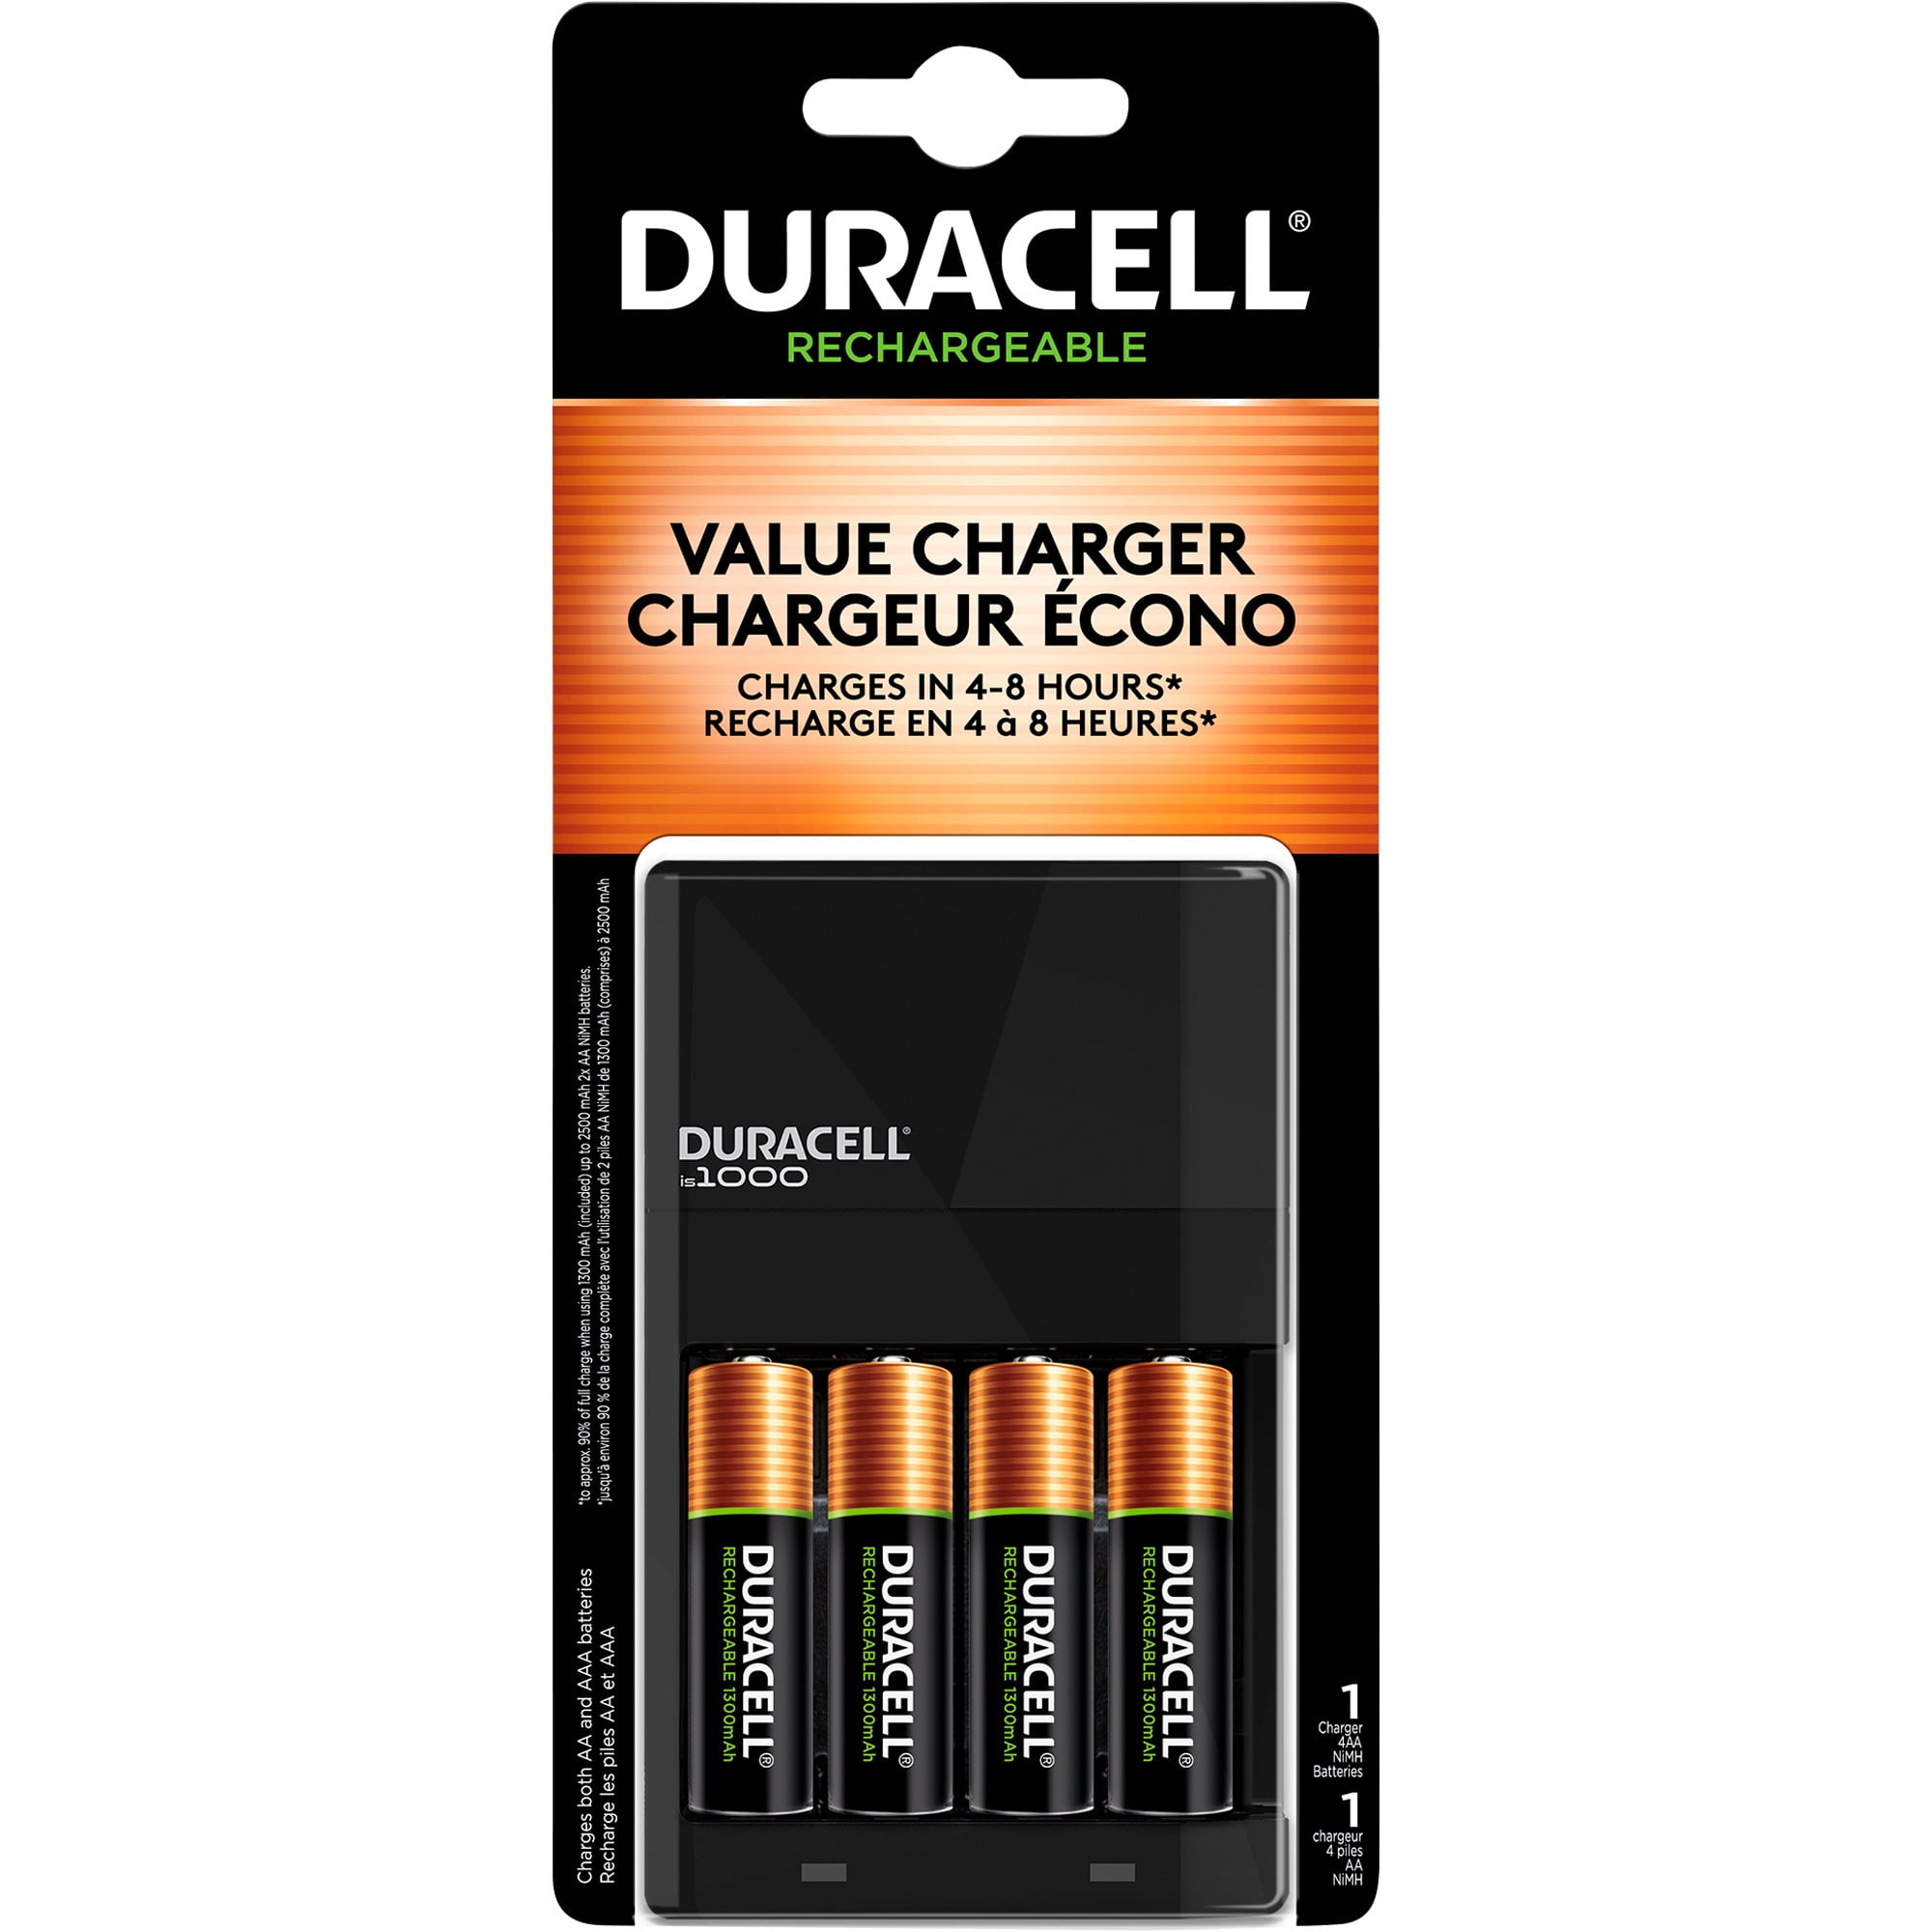 Duracell Charger and 4 AA NiMH Rechargeable Batteries, Model# DURCEF14 